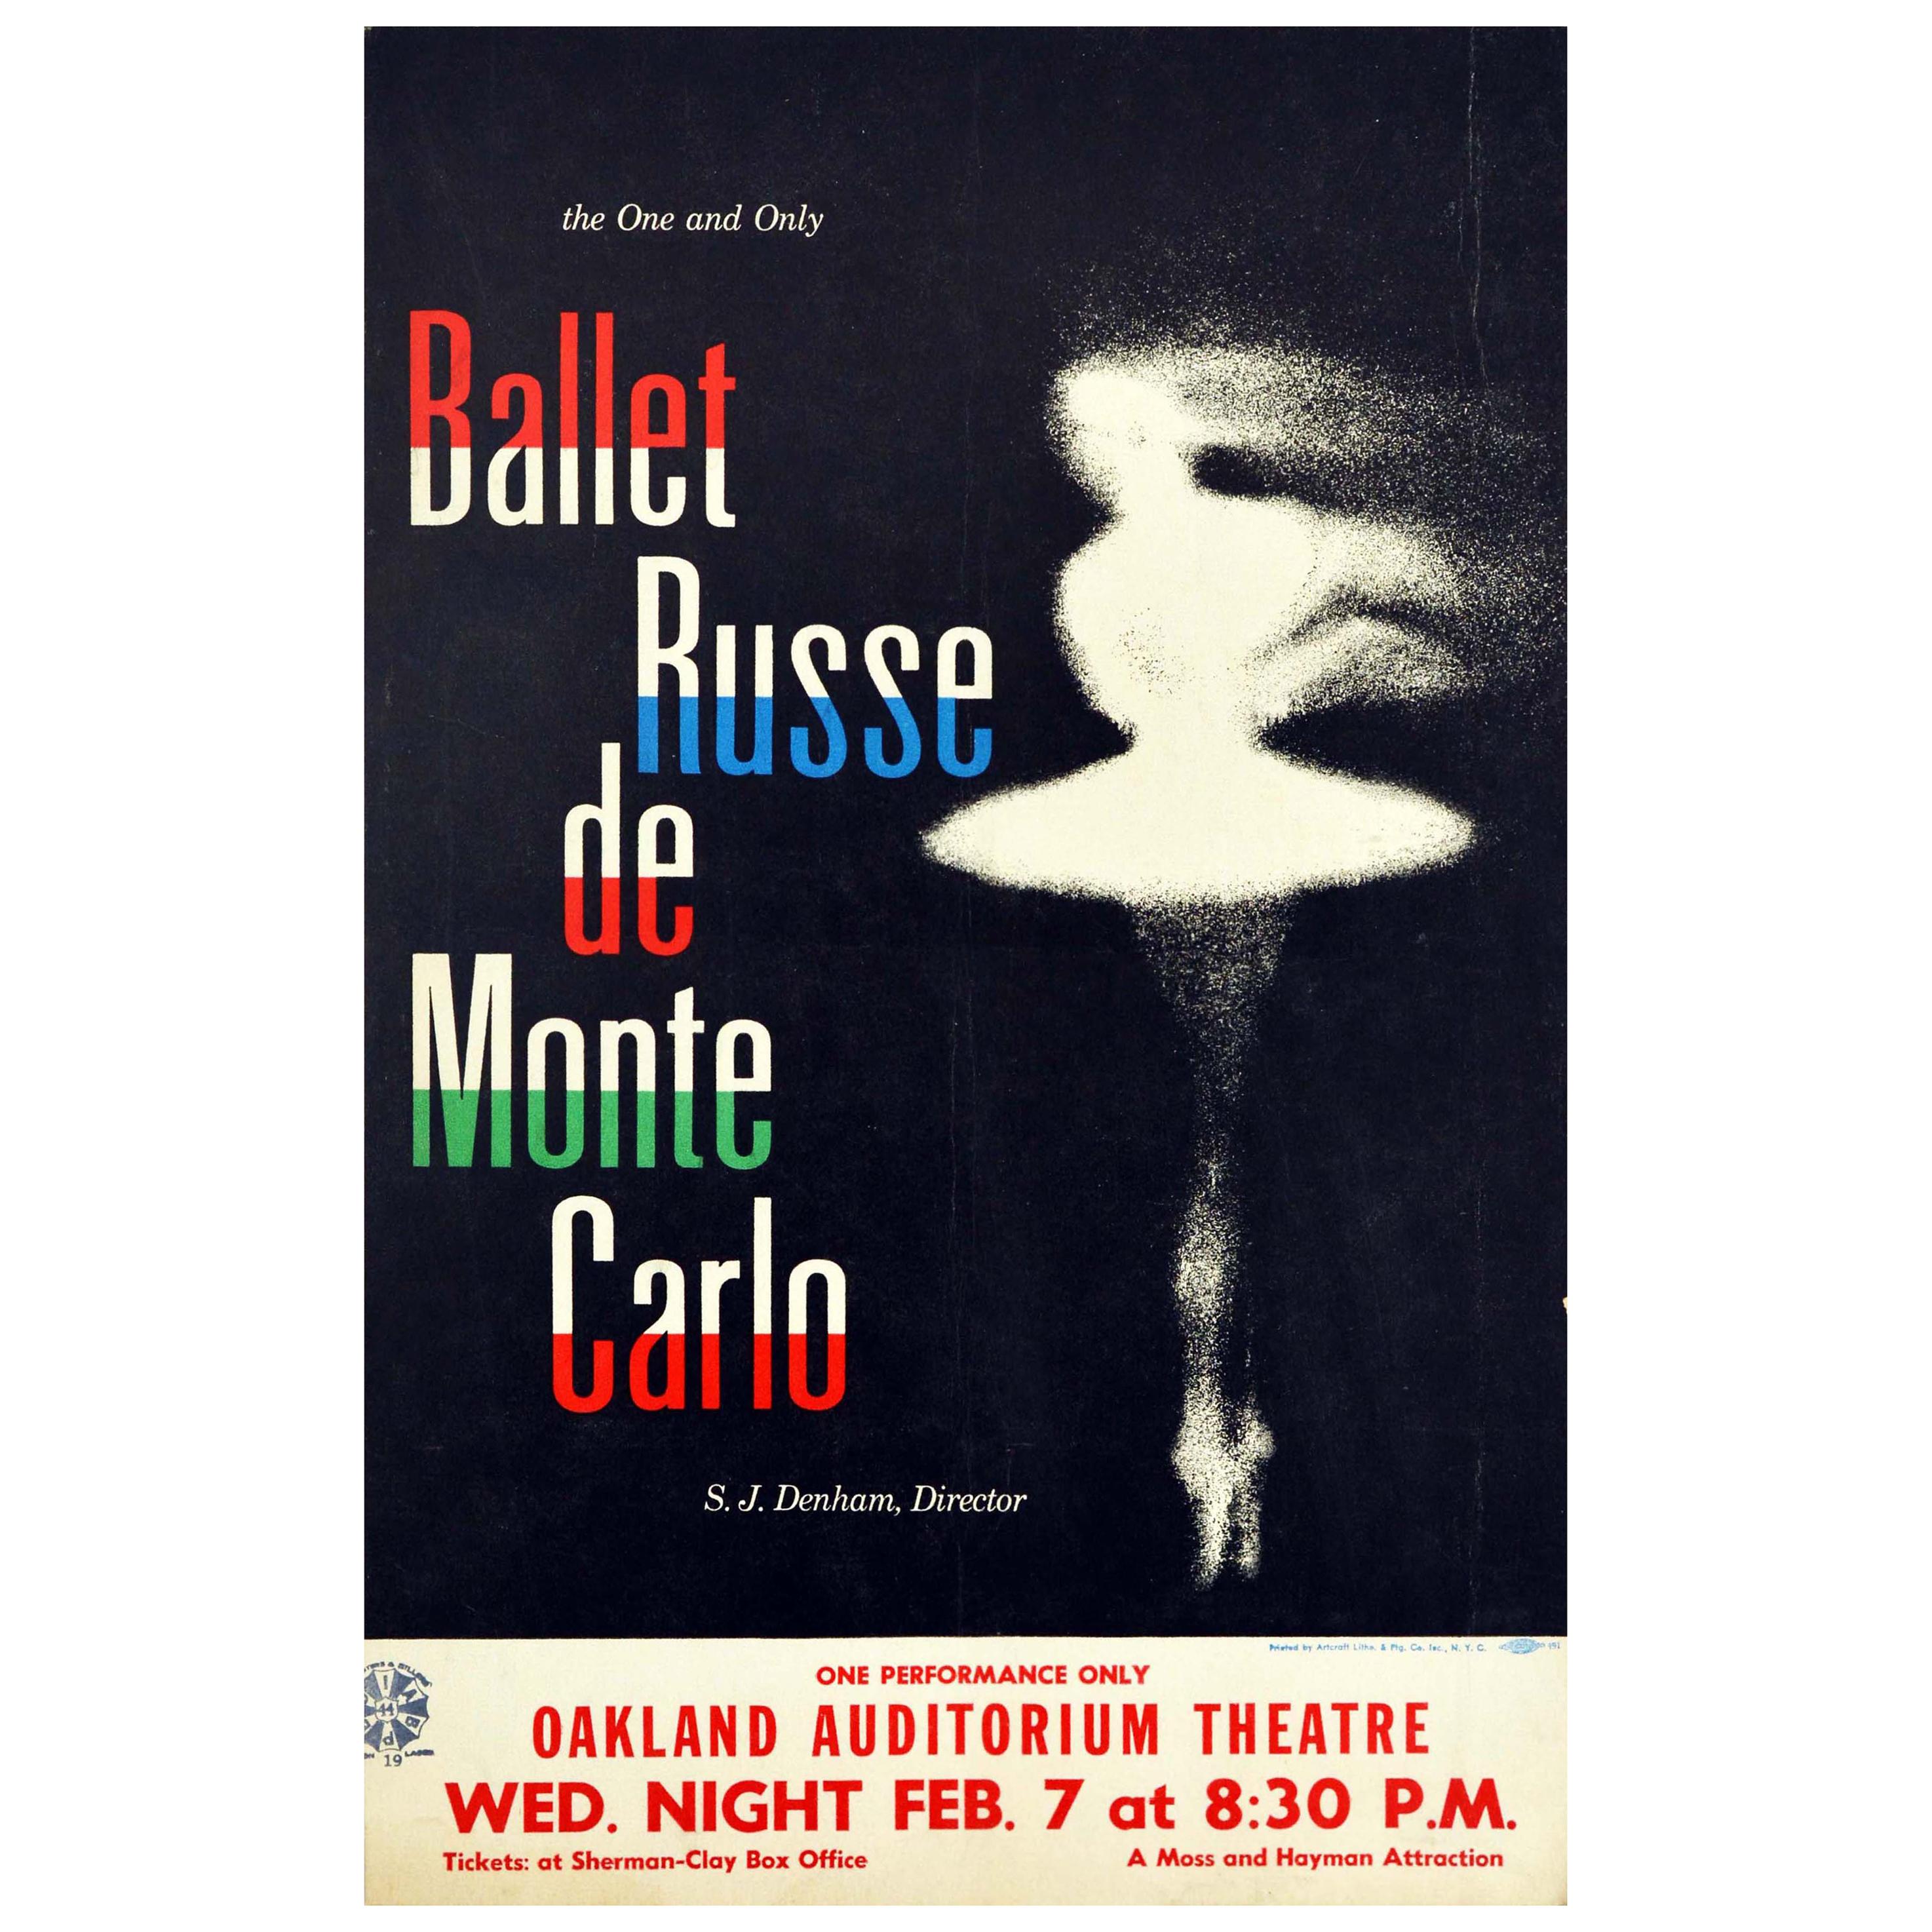 Original Vintage Poster The One And Only Ballet Russe De Monte Carlo Dancer Art For Sale